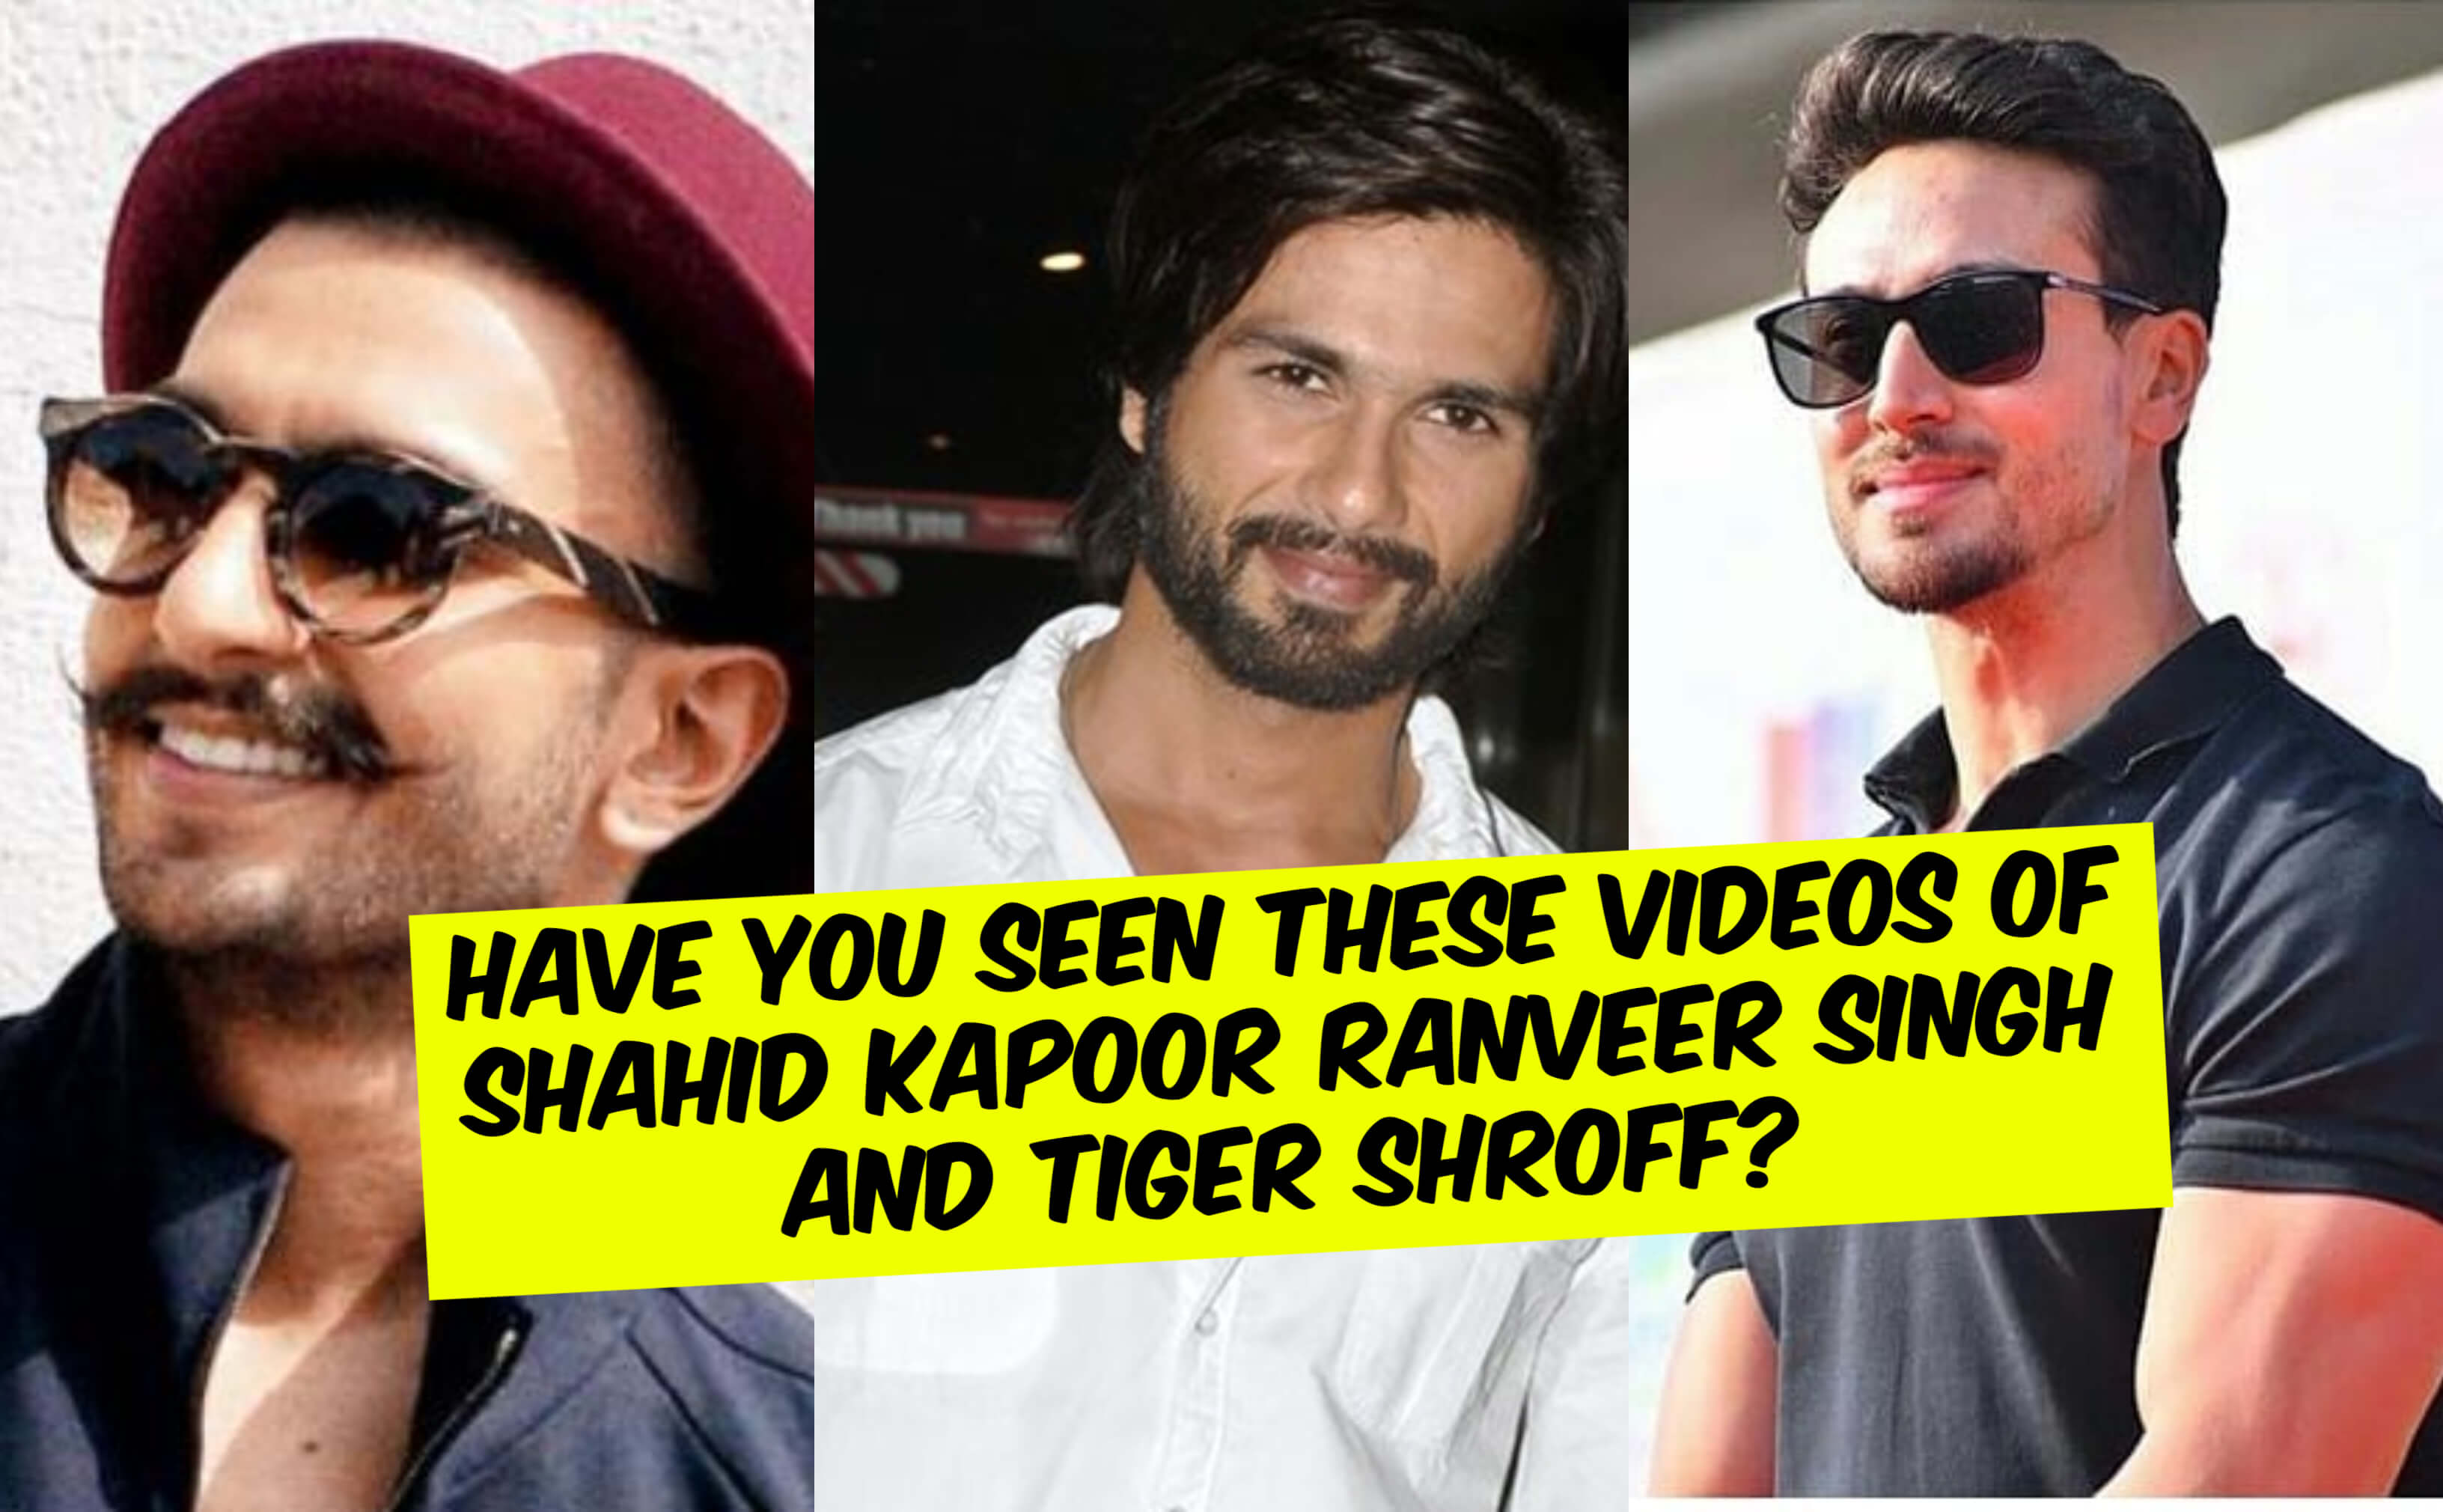 Have You Seen These Videos of Shahid Kapoor Ranveer Singh and Tiger Shroff?